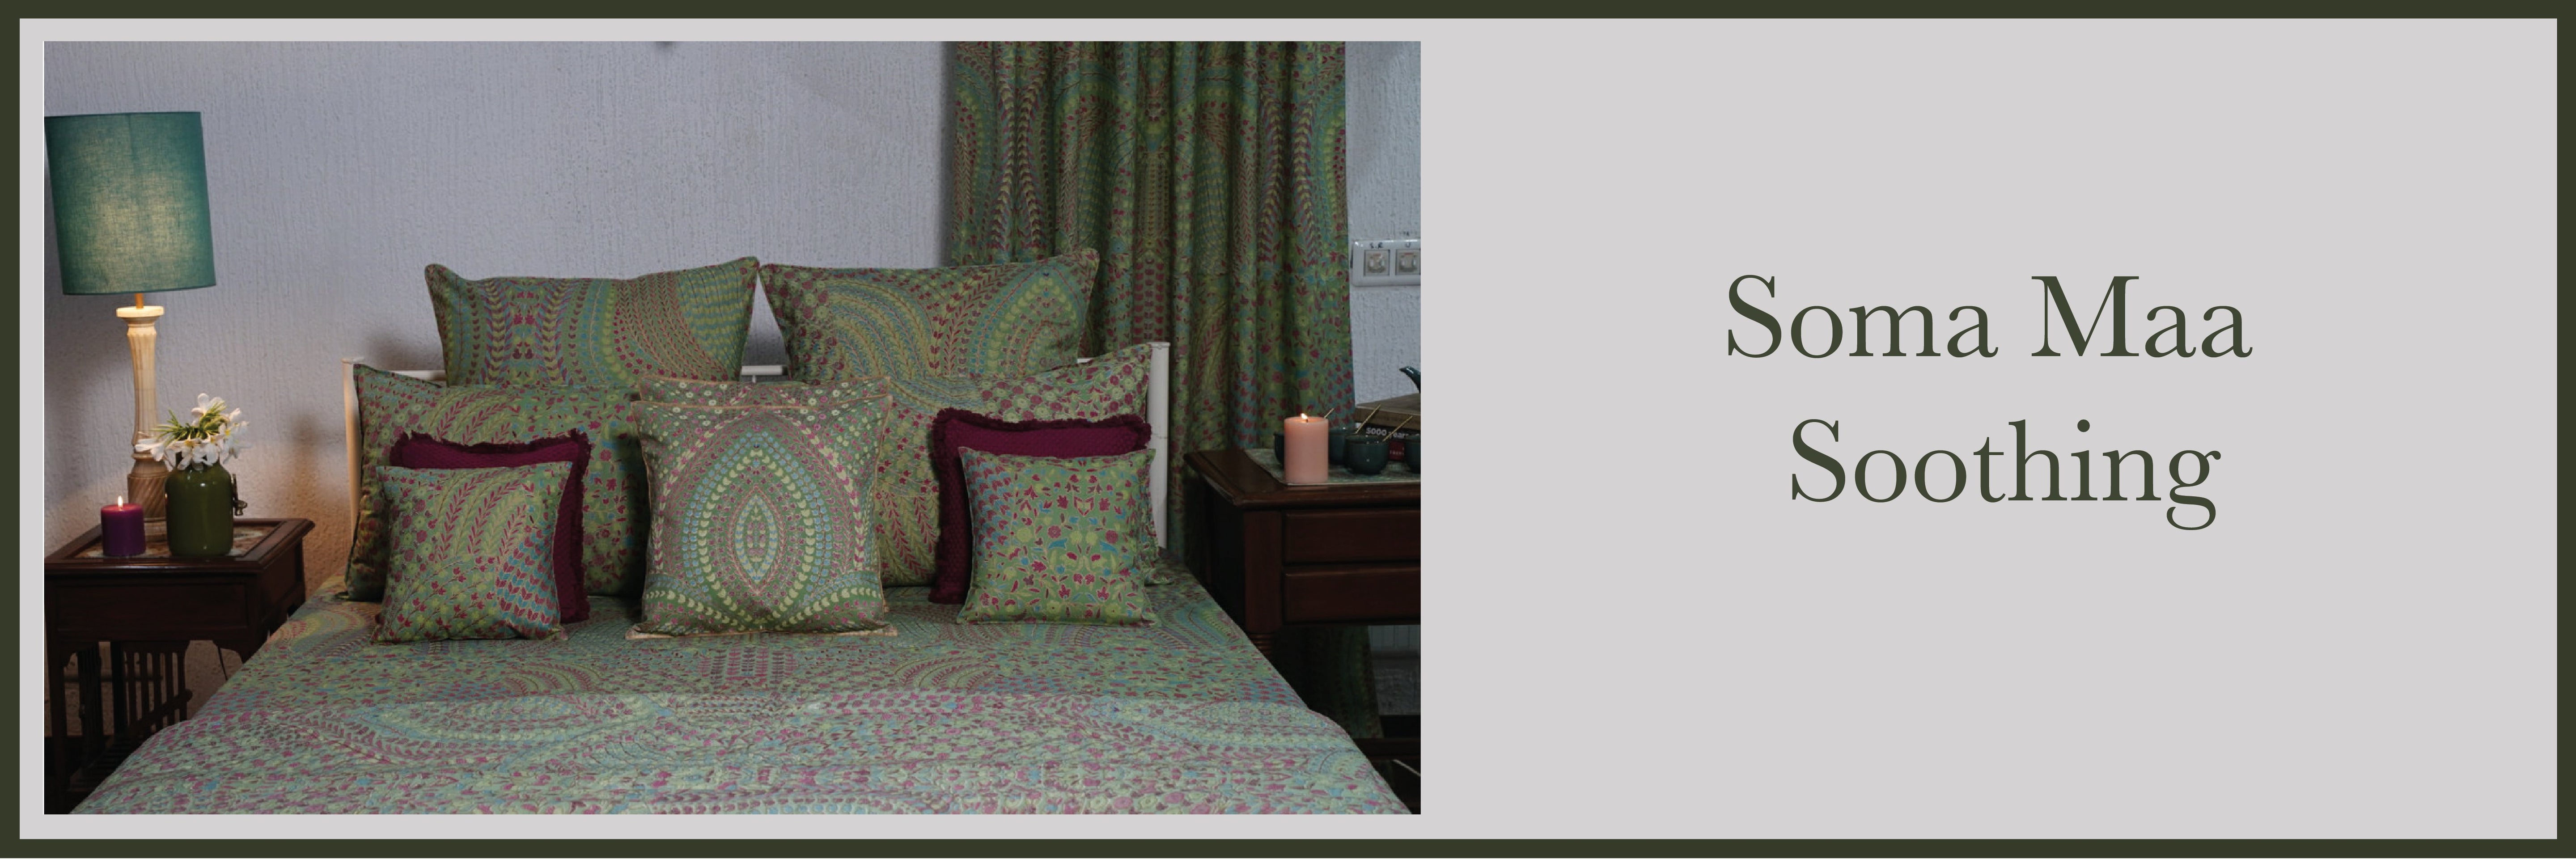 Soma Maa Soothing Green - Bedroom collection